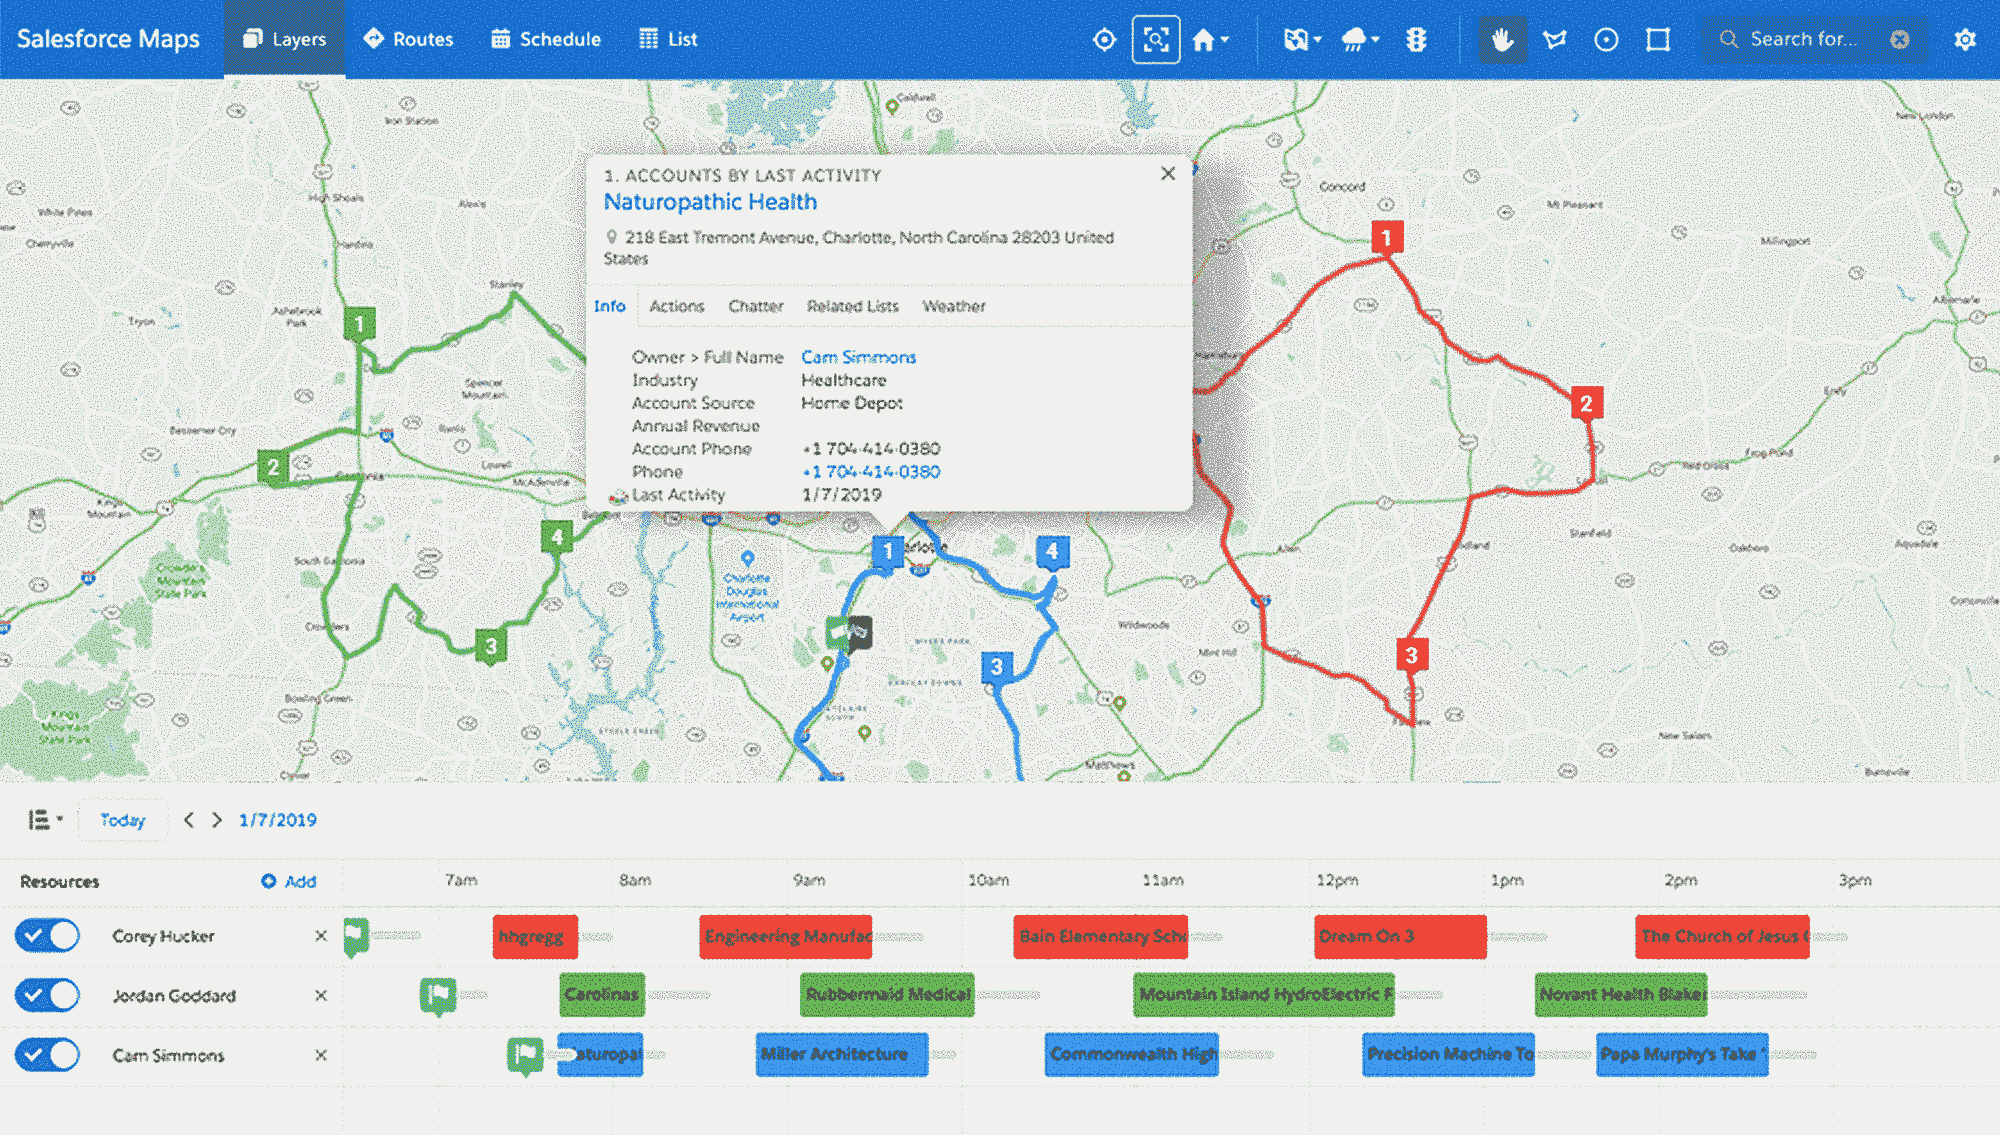 Screen shot of the updated Salesforce Maps user interface